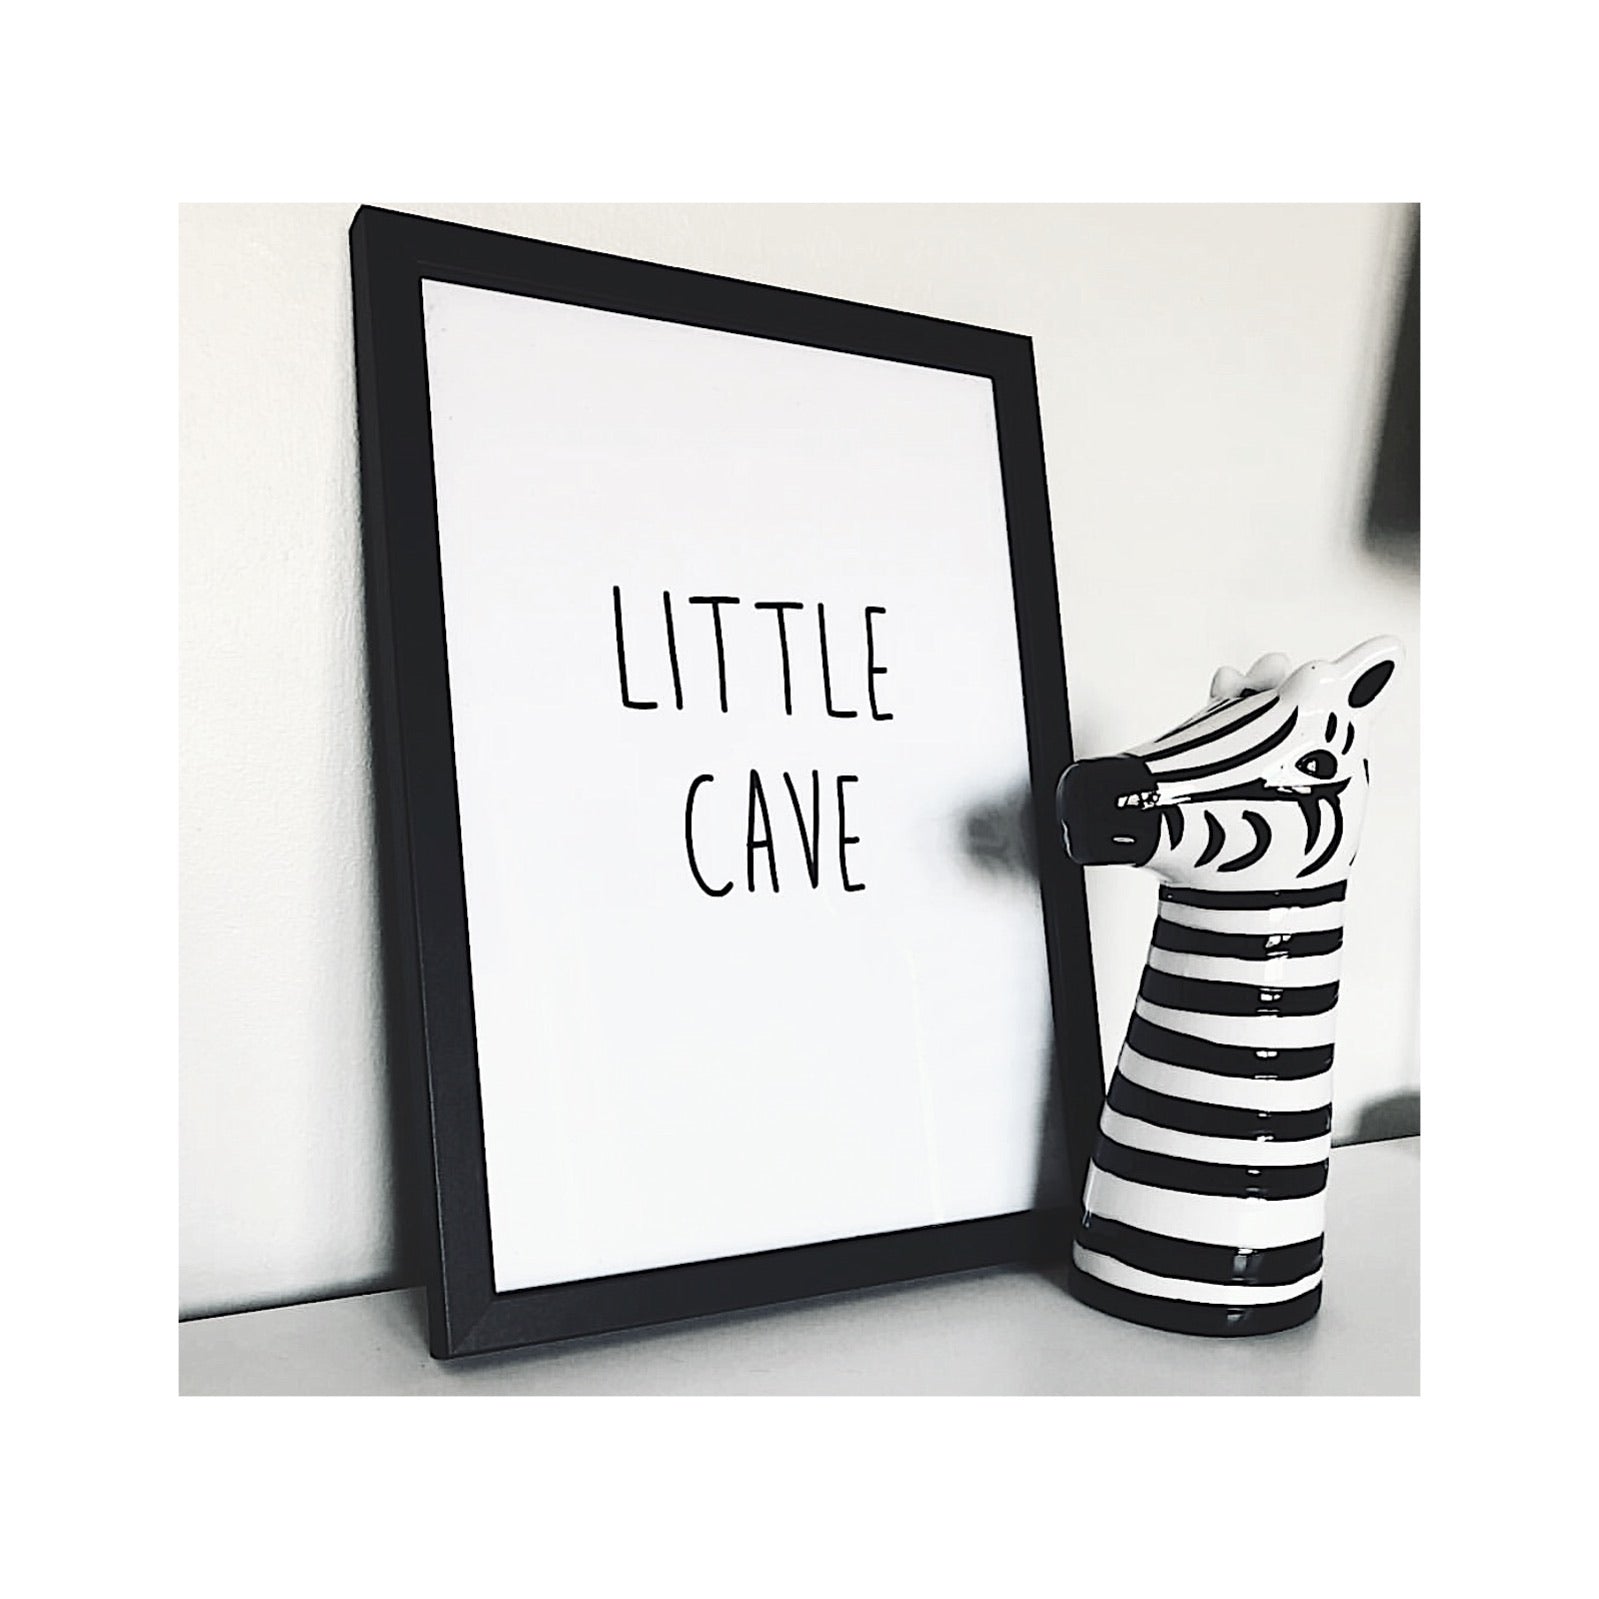 Little cave - THE WALL STYLIST